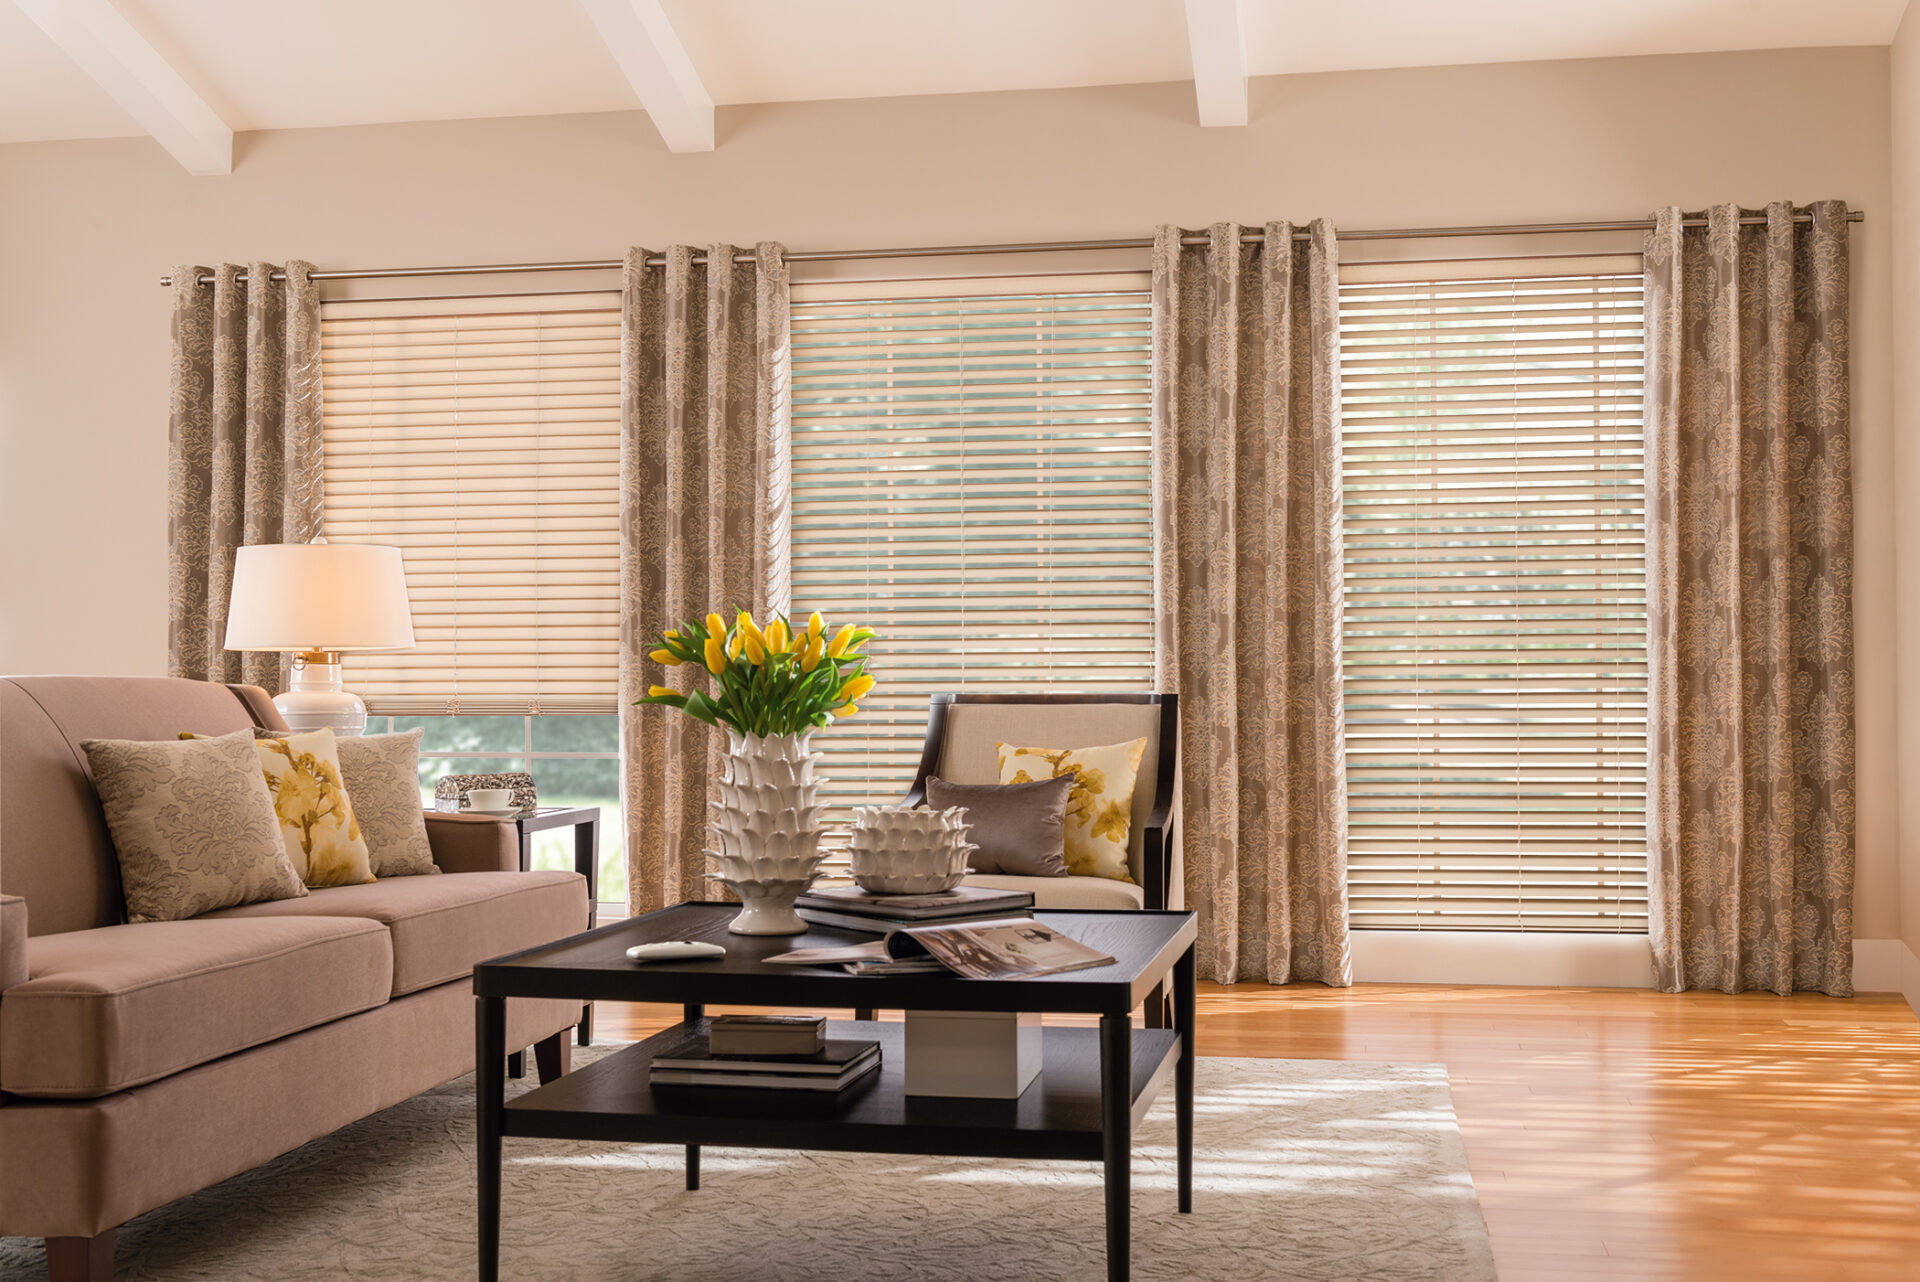 When to Choose Drapery, Curtains, or Blinds? Best Guide